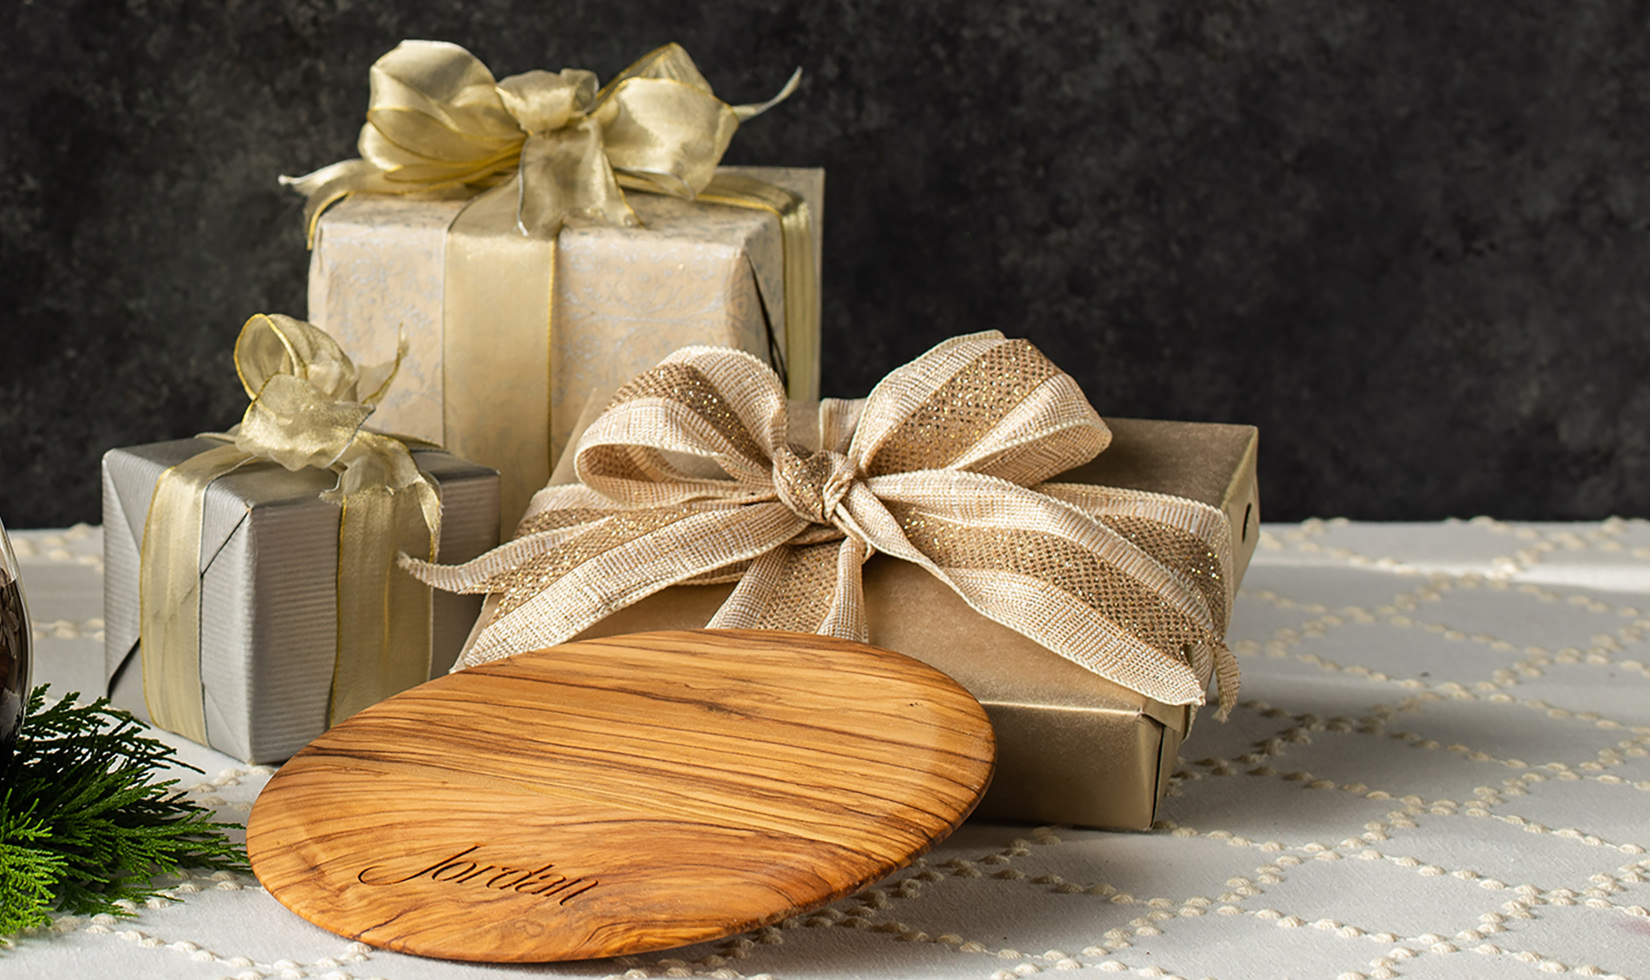 olive wood cutting board by Jordan Winery on table with presents